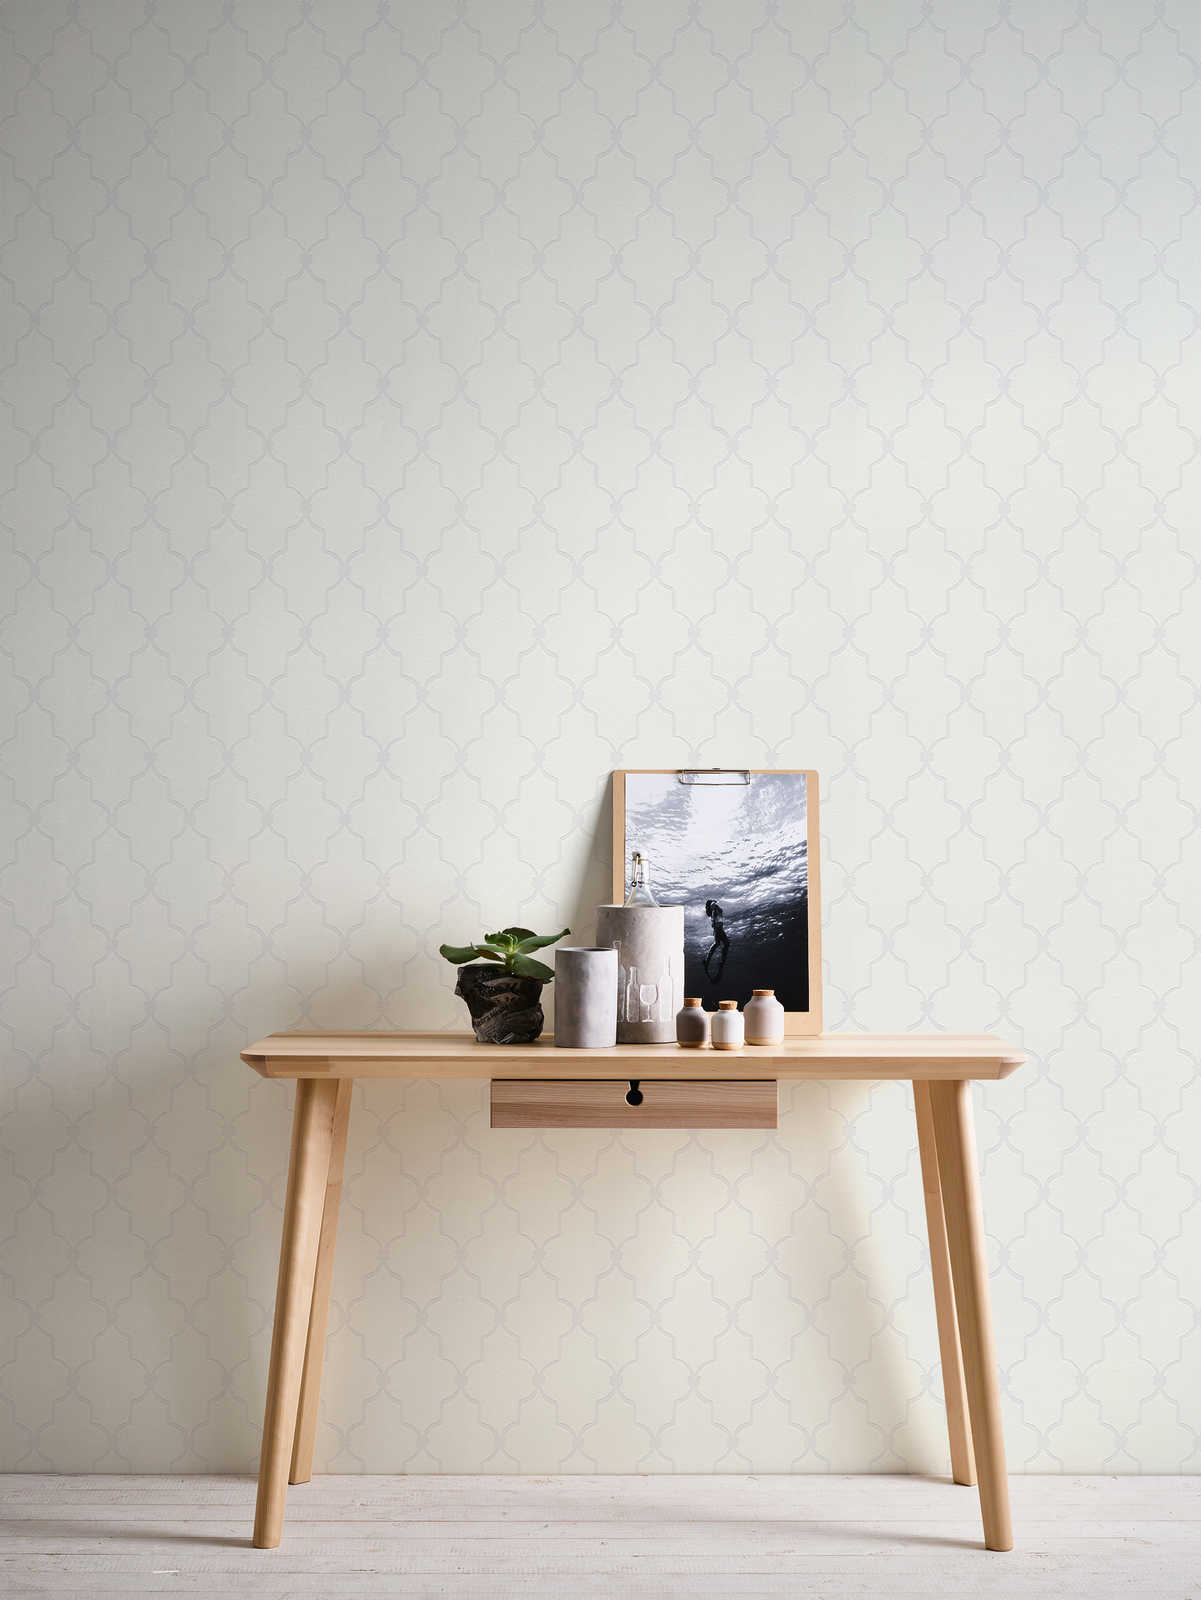             Paintable wallpaper with tile pattern - Paintable
        